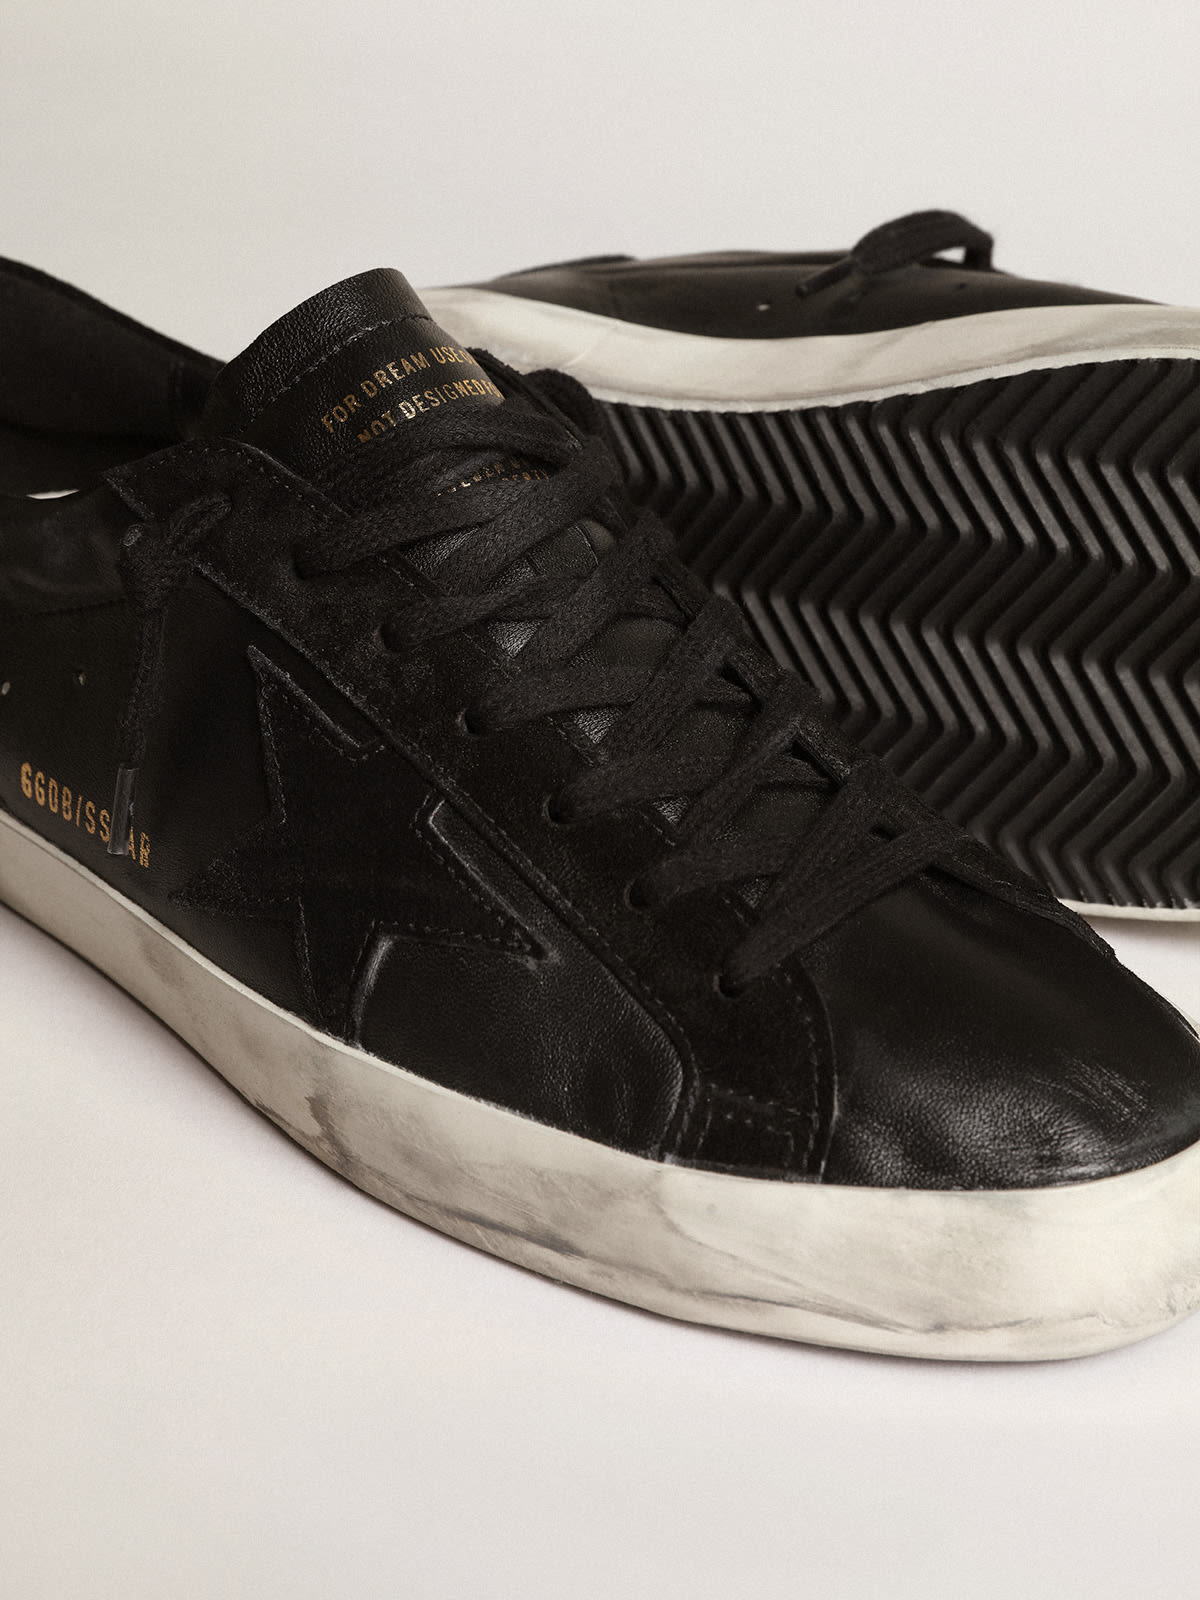 Golden Goose - Men's Super-Star in black nappa with black suede star and heel tab in 